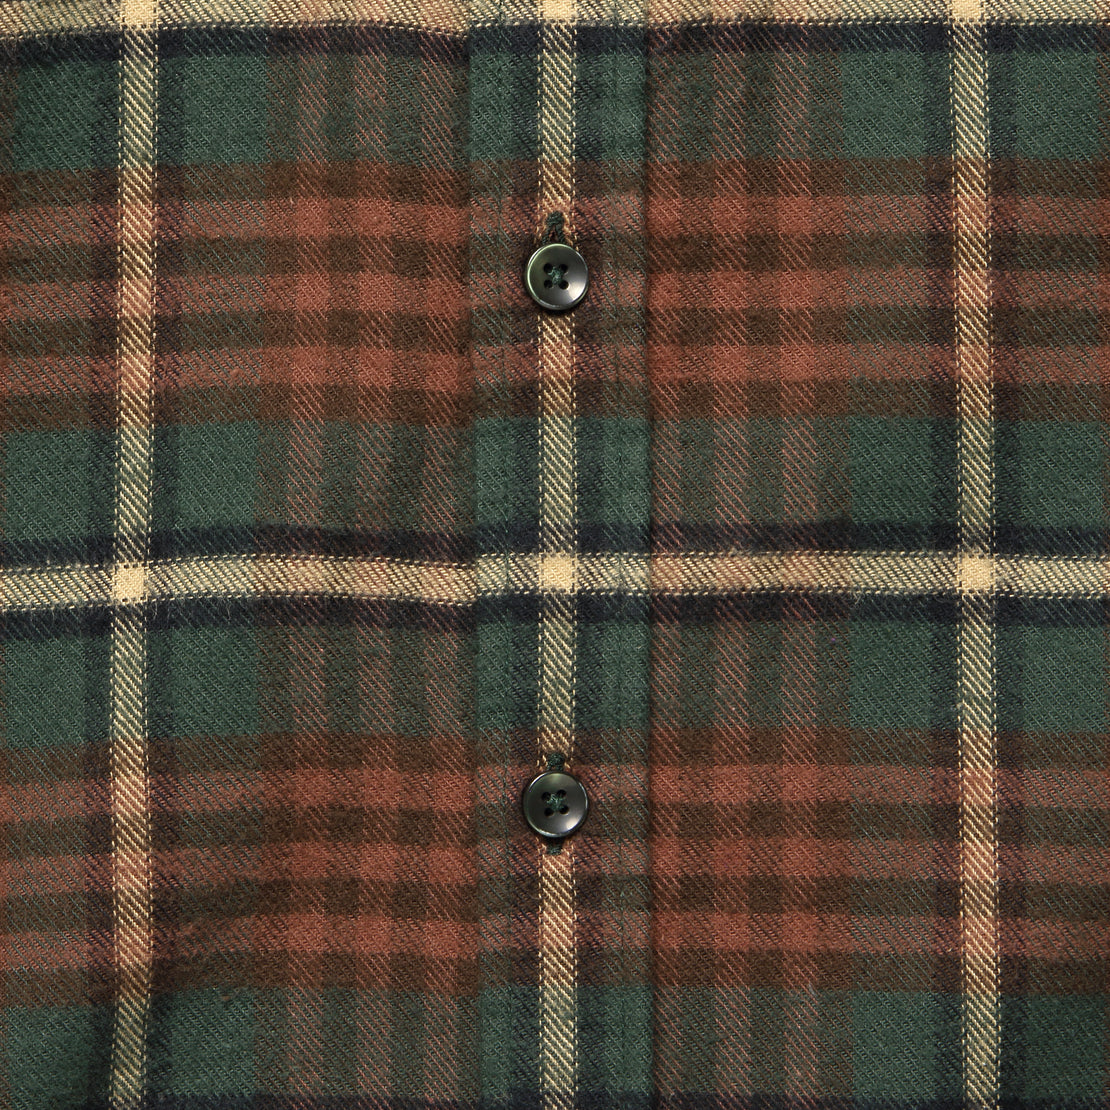 Smog Shirt - Brown/Green - Portuguese Flannel - STAG Provisions - Tops - L/S Woven - Plaid